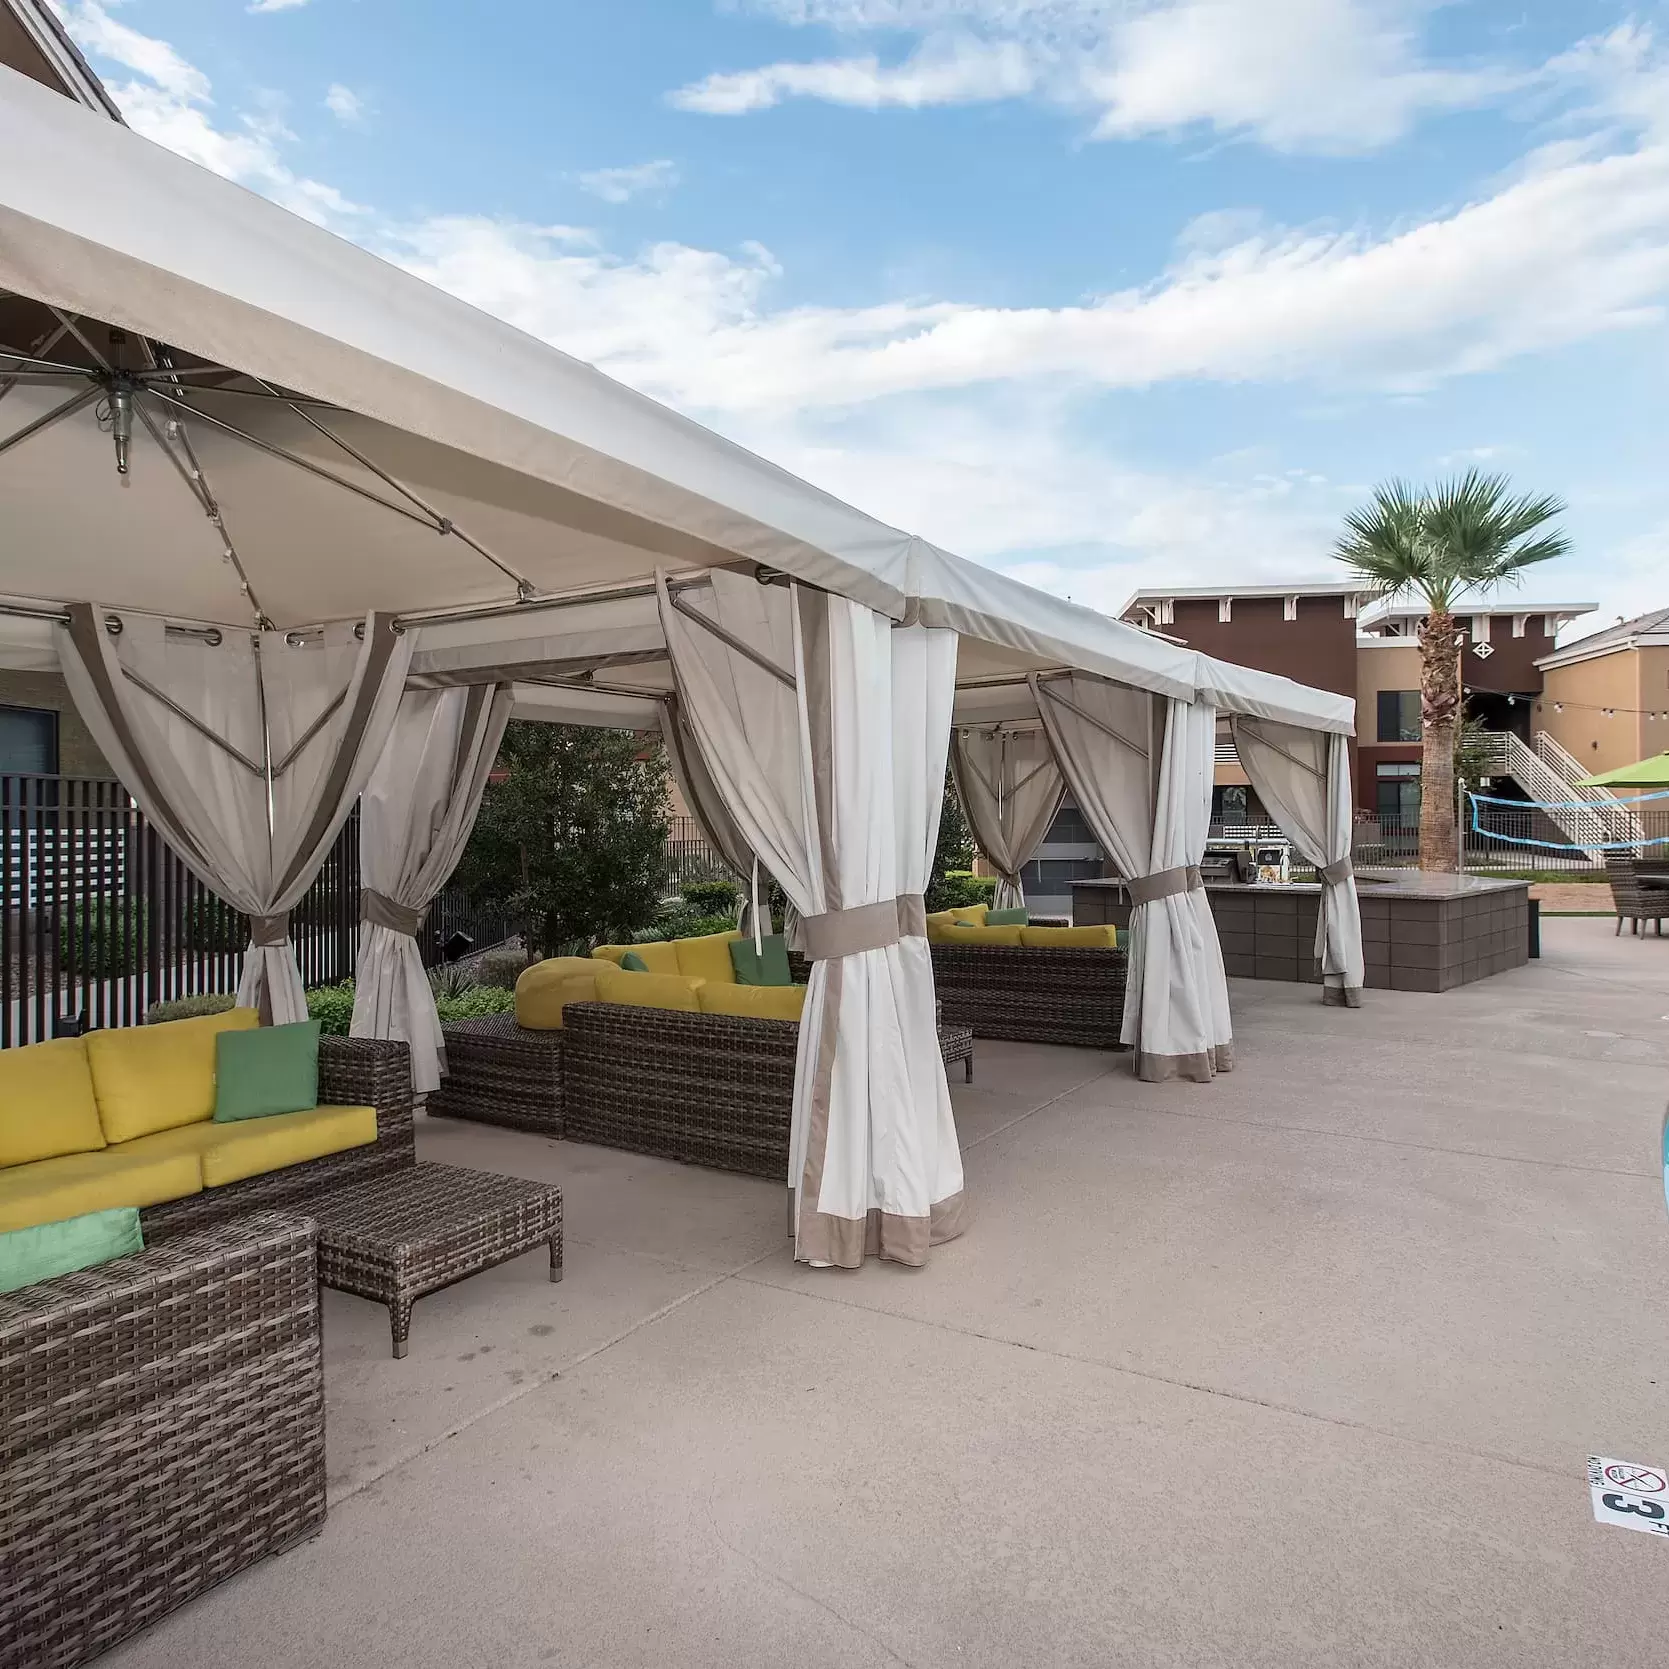 Beautiful shaded poolside cabanas offer residents a place to socialize or relax.